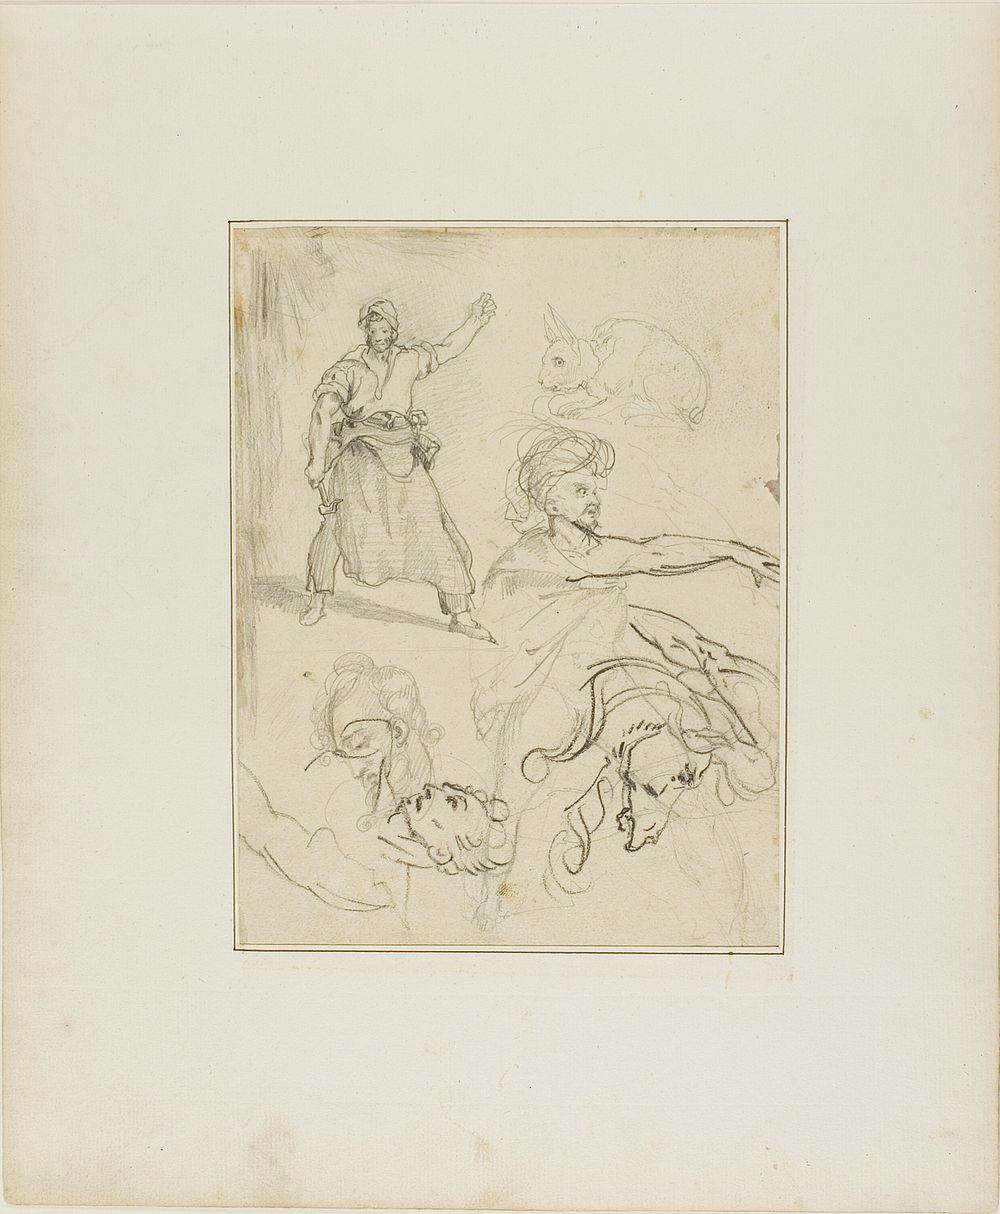 Studies of a Blacksmith and a Horse's Head with Sketches of Other Figures and a Rabbit by Jean Louis André Théodore Géricault